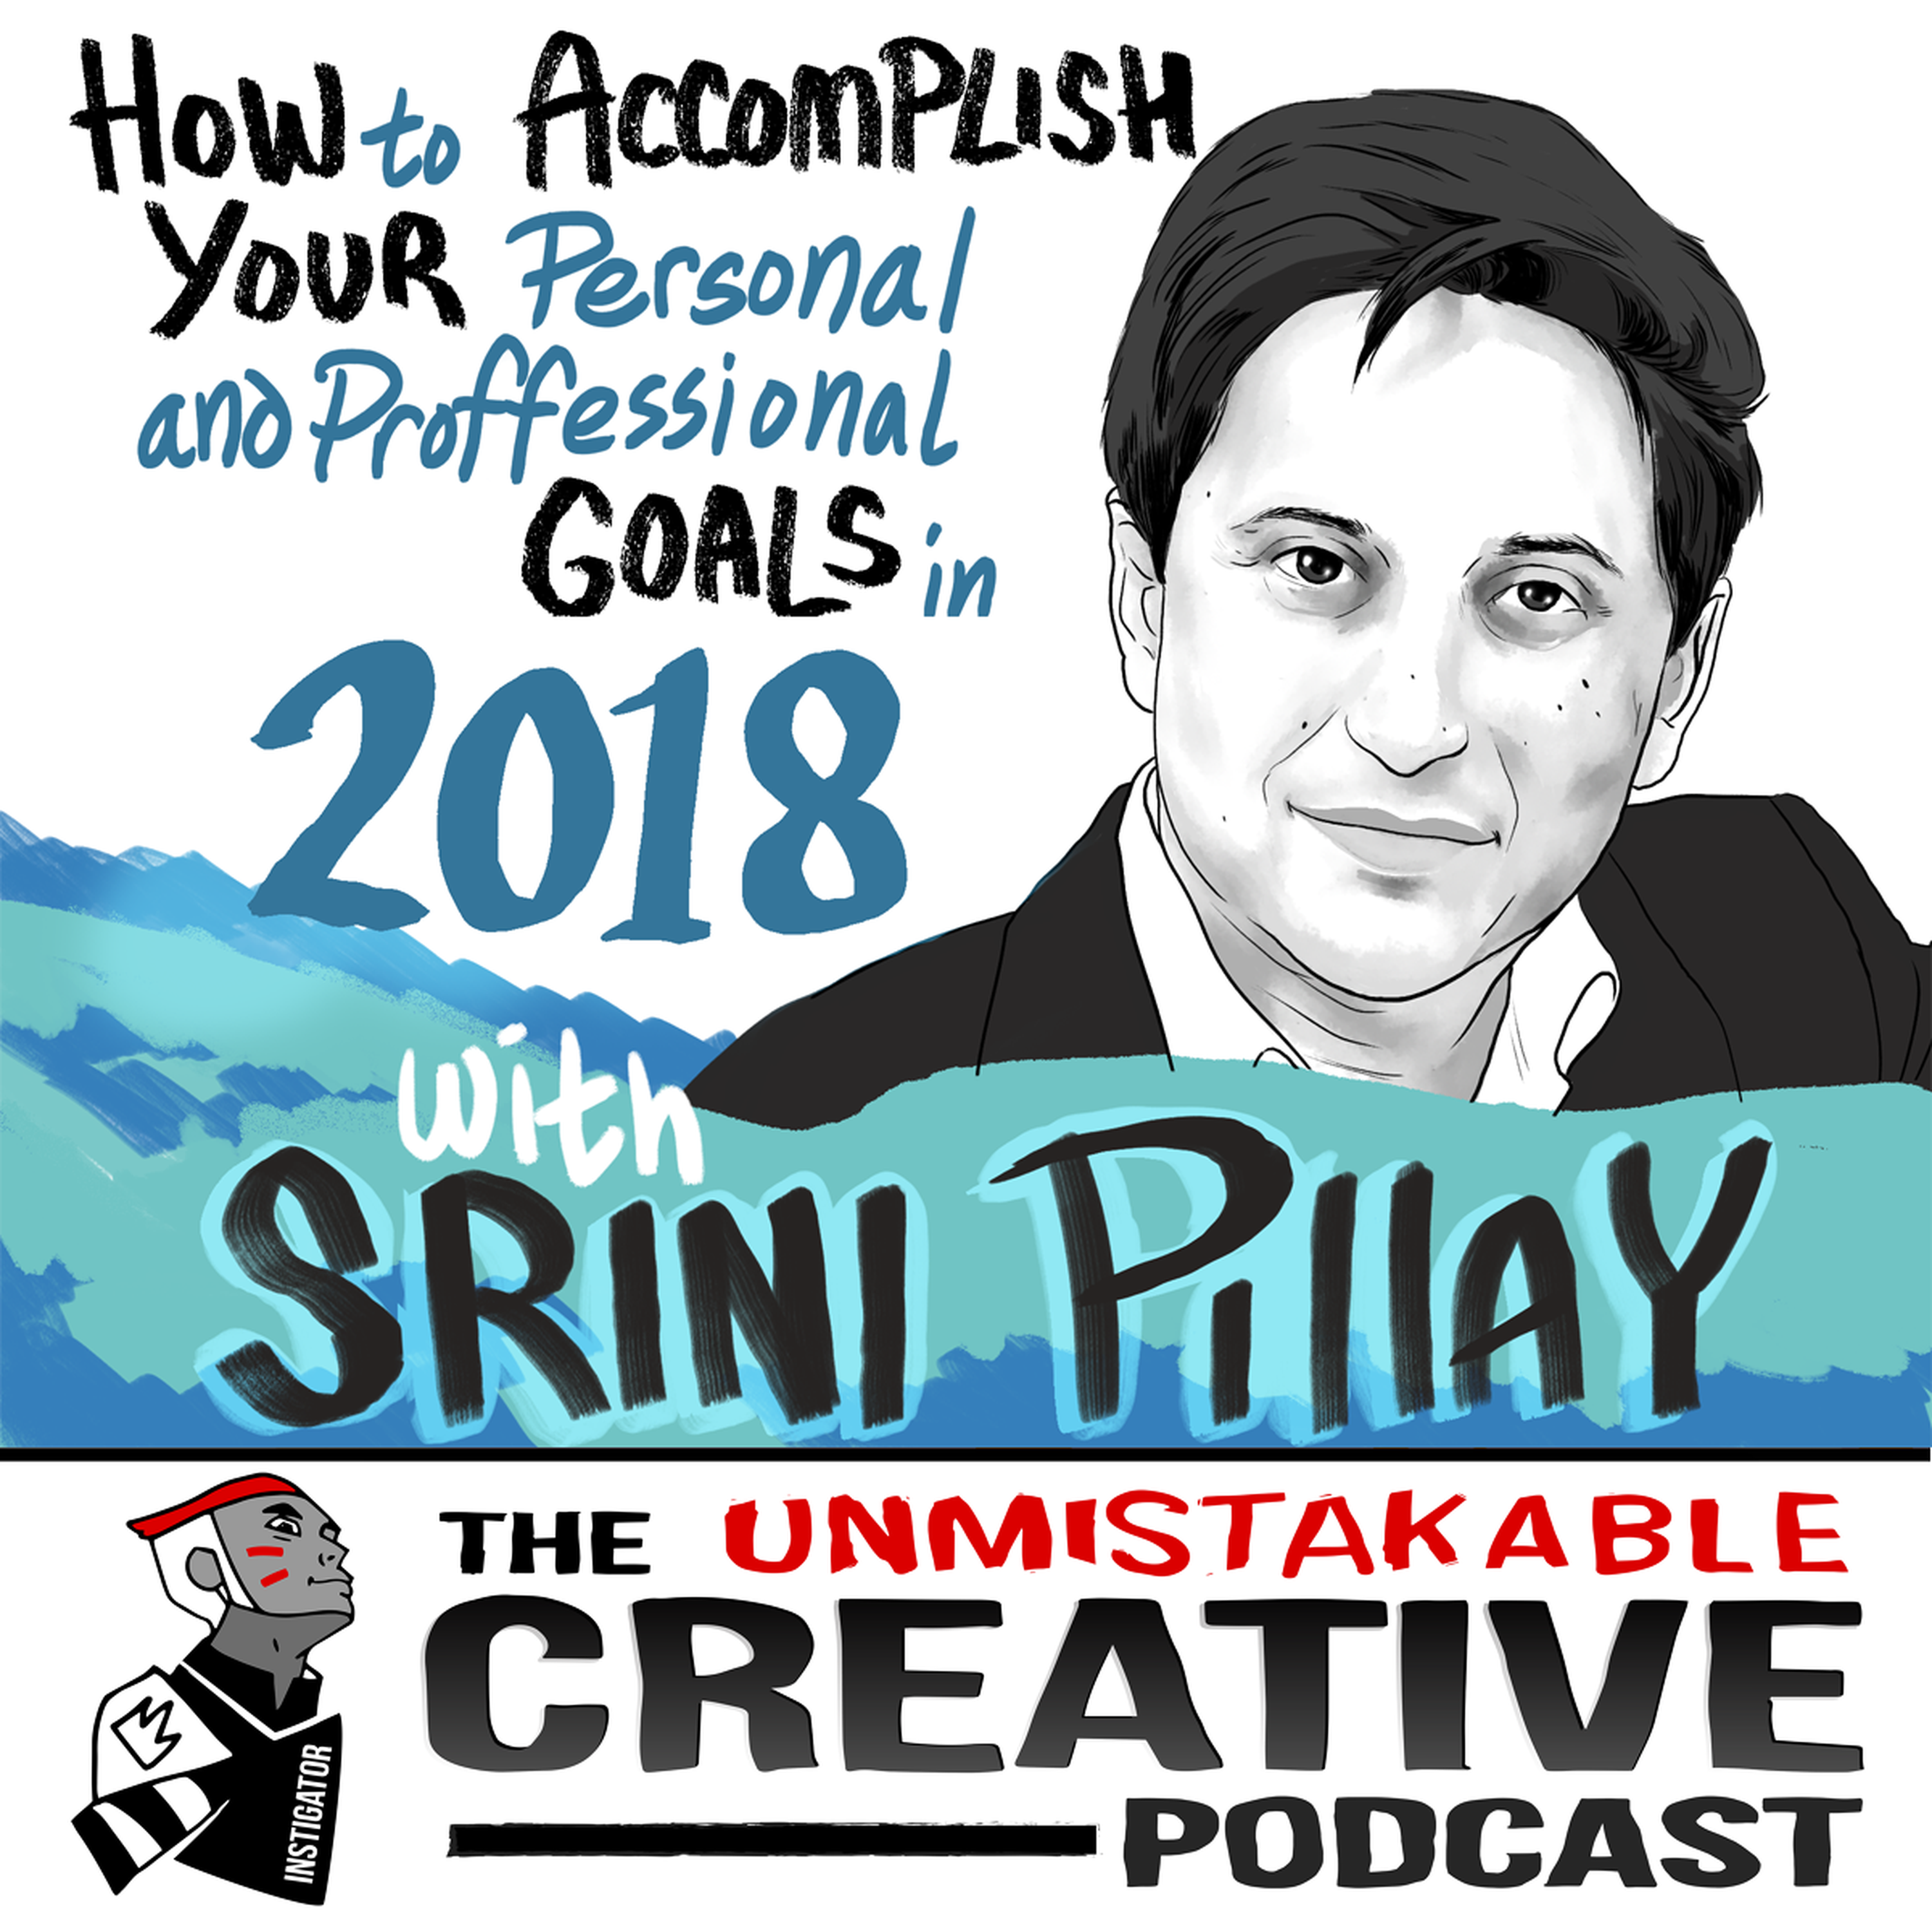 Srini Pillay: How to Accomplish Your Personal and Professional Goals in 2018